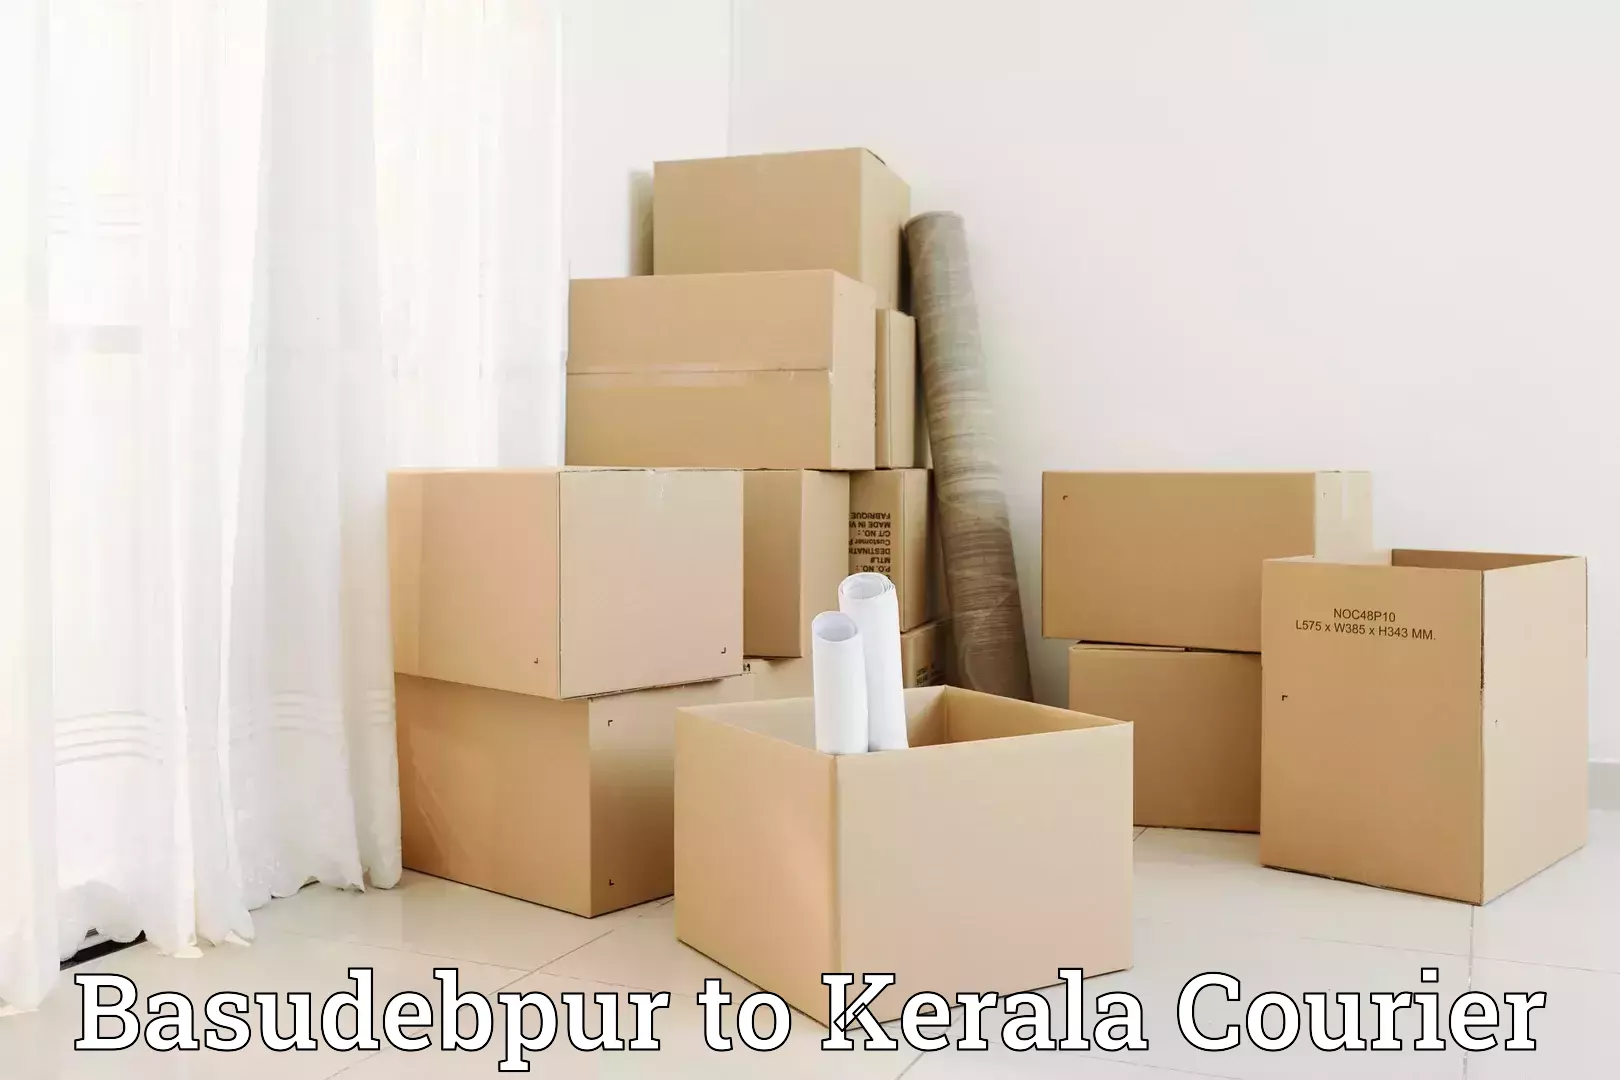 Furniture moving specialists Basudebpur to Kottayam